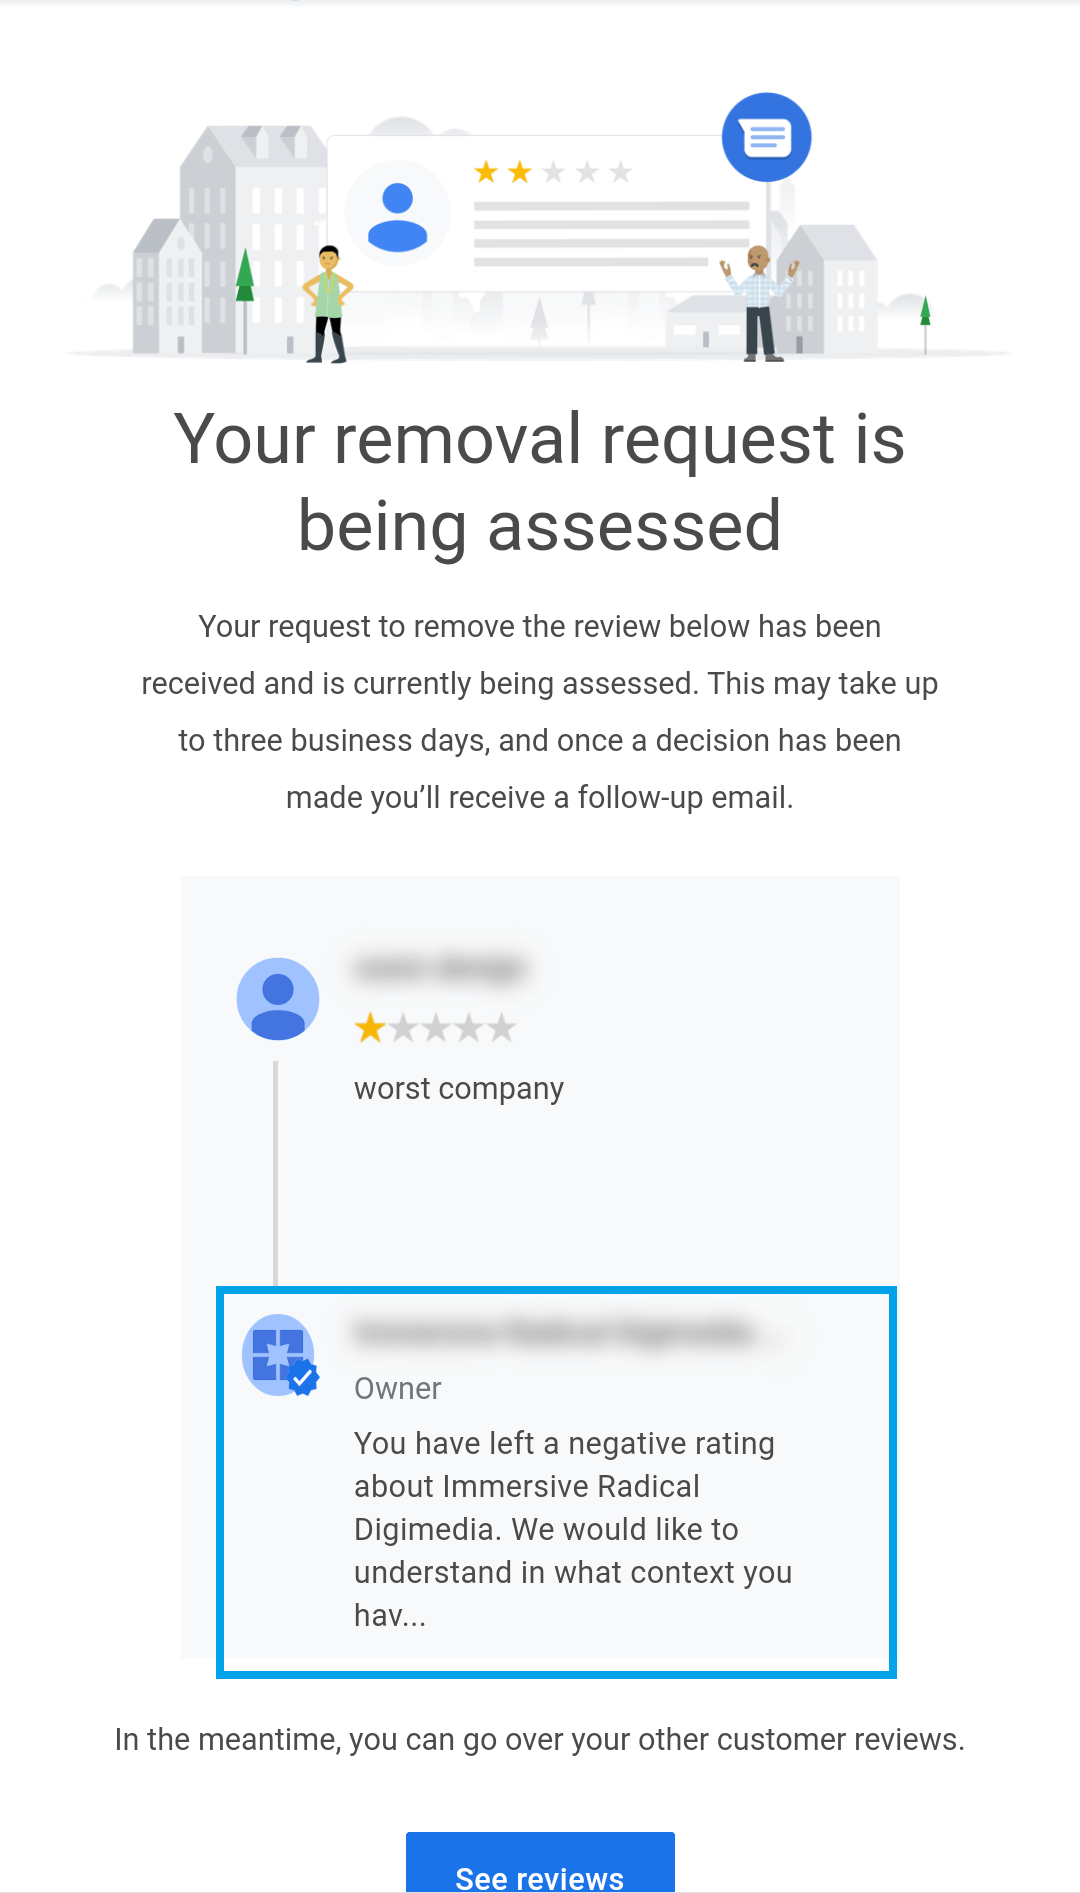 confirm back on your email with their decision